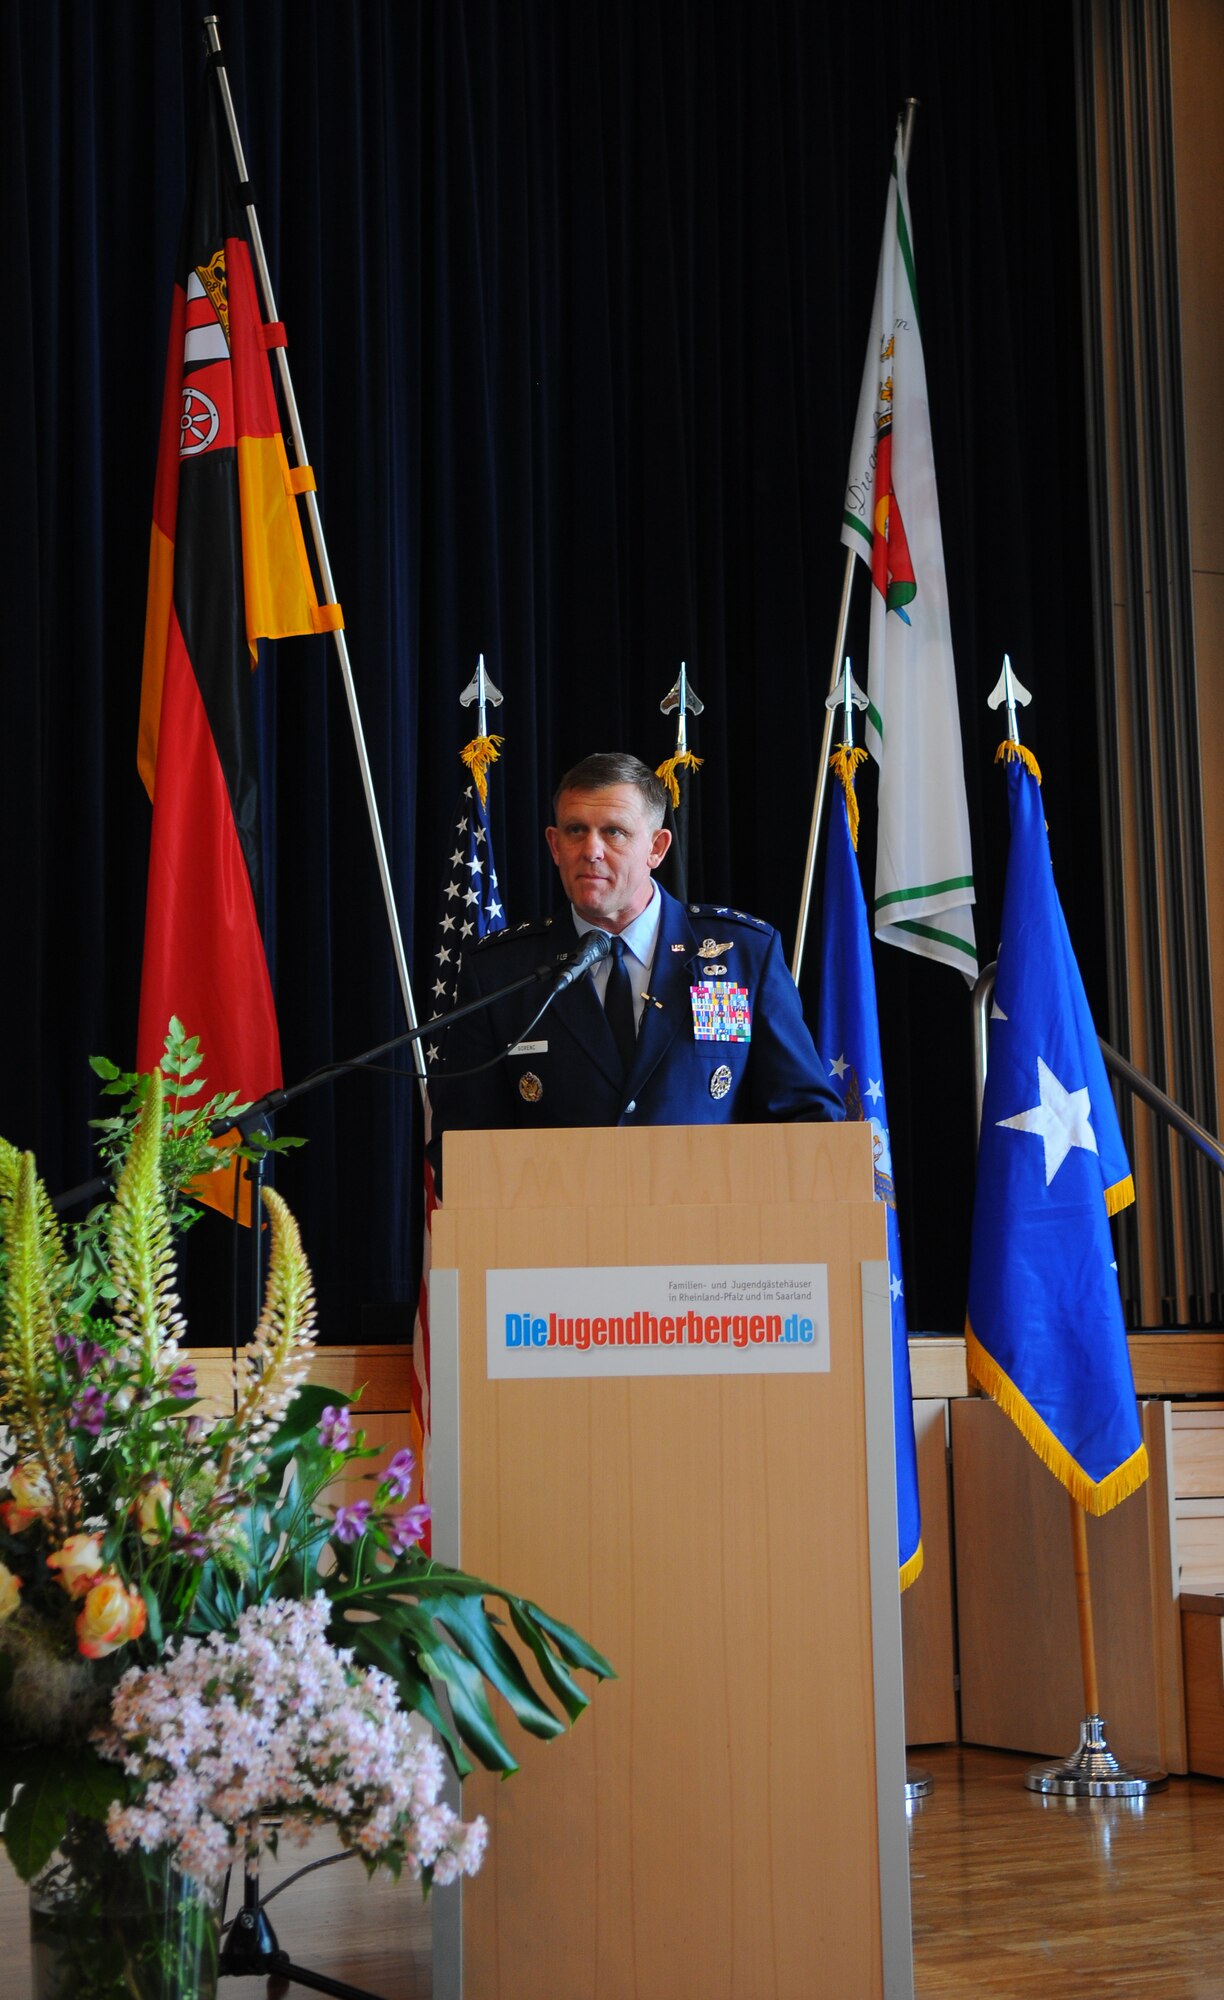 PRUEM, Germany – Lt. Gen. Frank Gorenc, 3rd Air Force commander, speaks in front of a multinational military crowd at a military reception hosted by the 52nd Fighter Wing during the Rheinland-Pfalz Day Fair in Pruem, Germany, May 28. The Rheinland-Pfalz Day Fair is a three-day festival with entertainment, informational booths and other attractions. (U.S. Air Force photo/Airman 1st Class Dillon Davis)